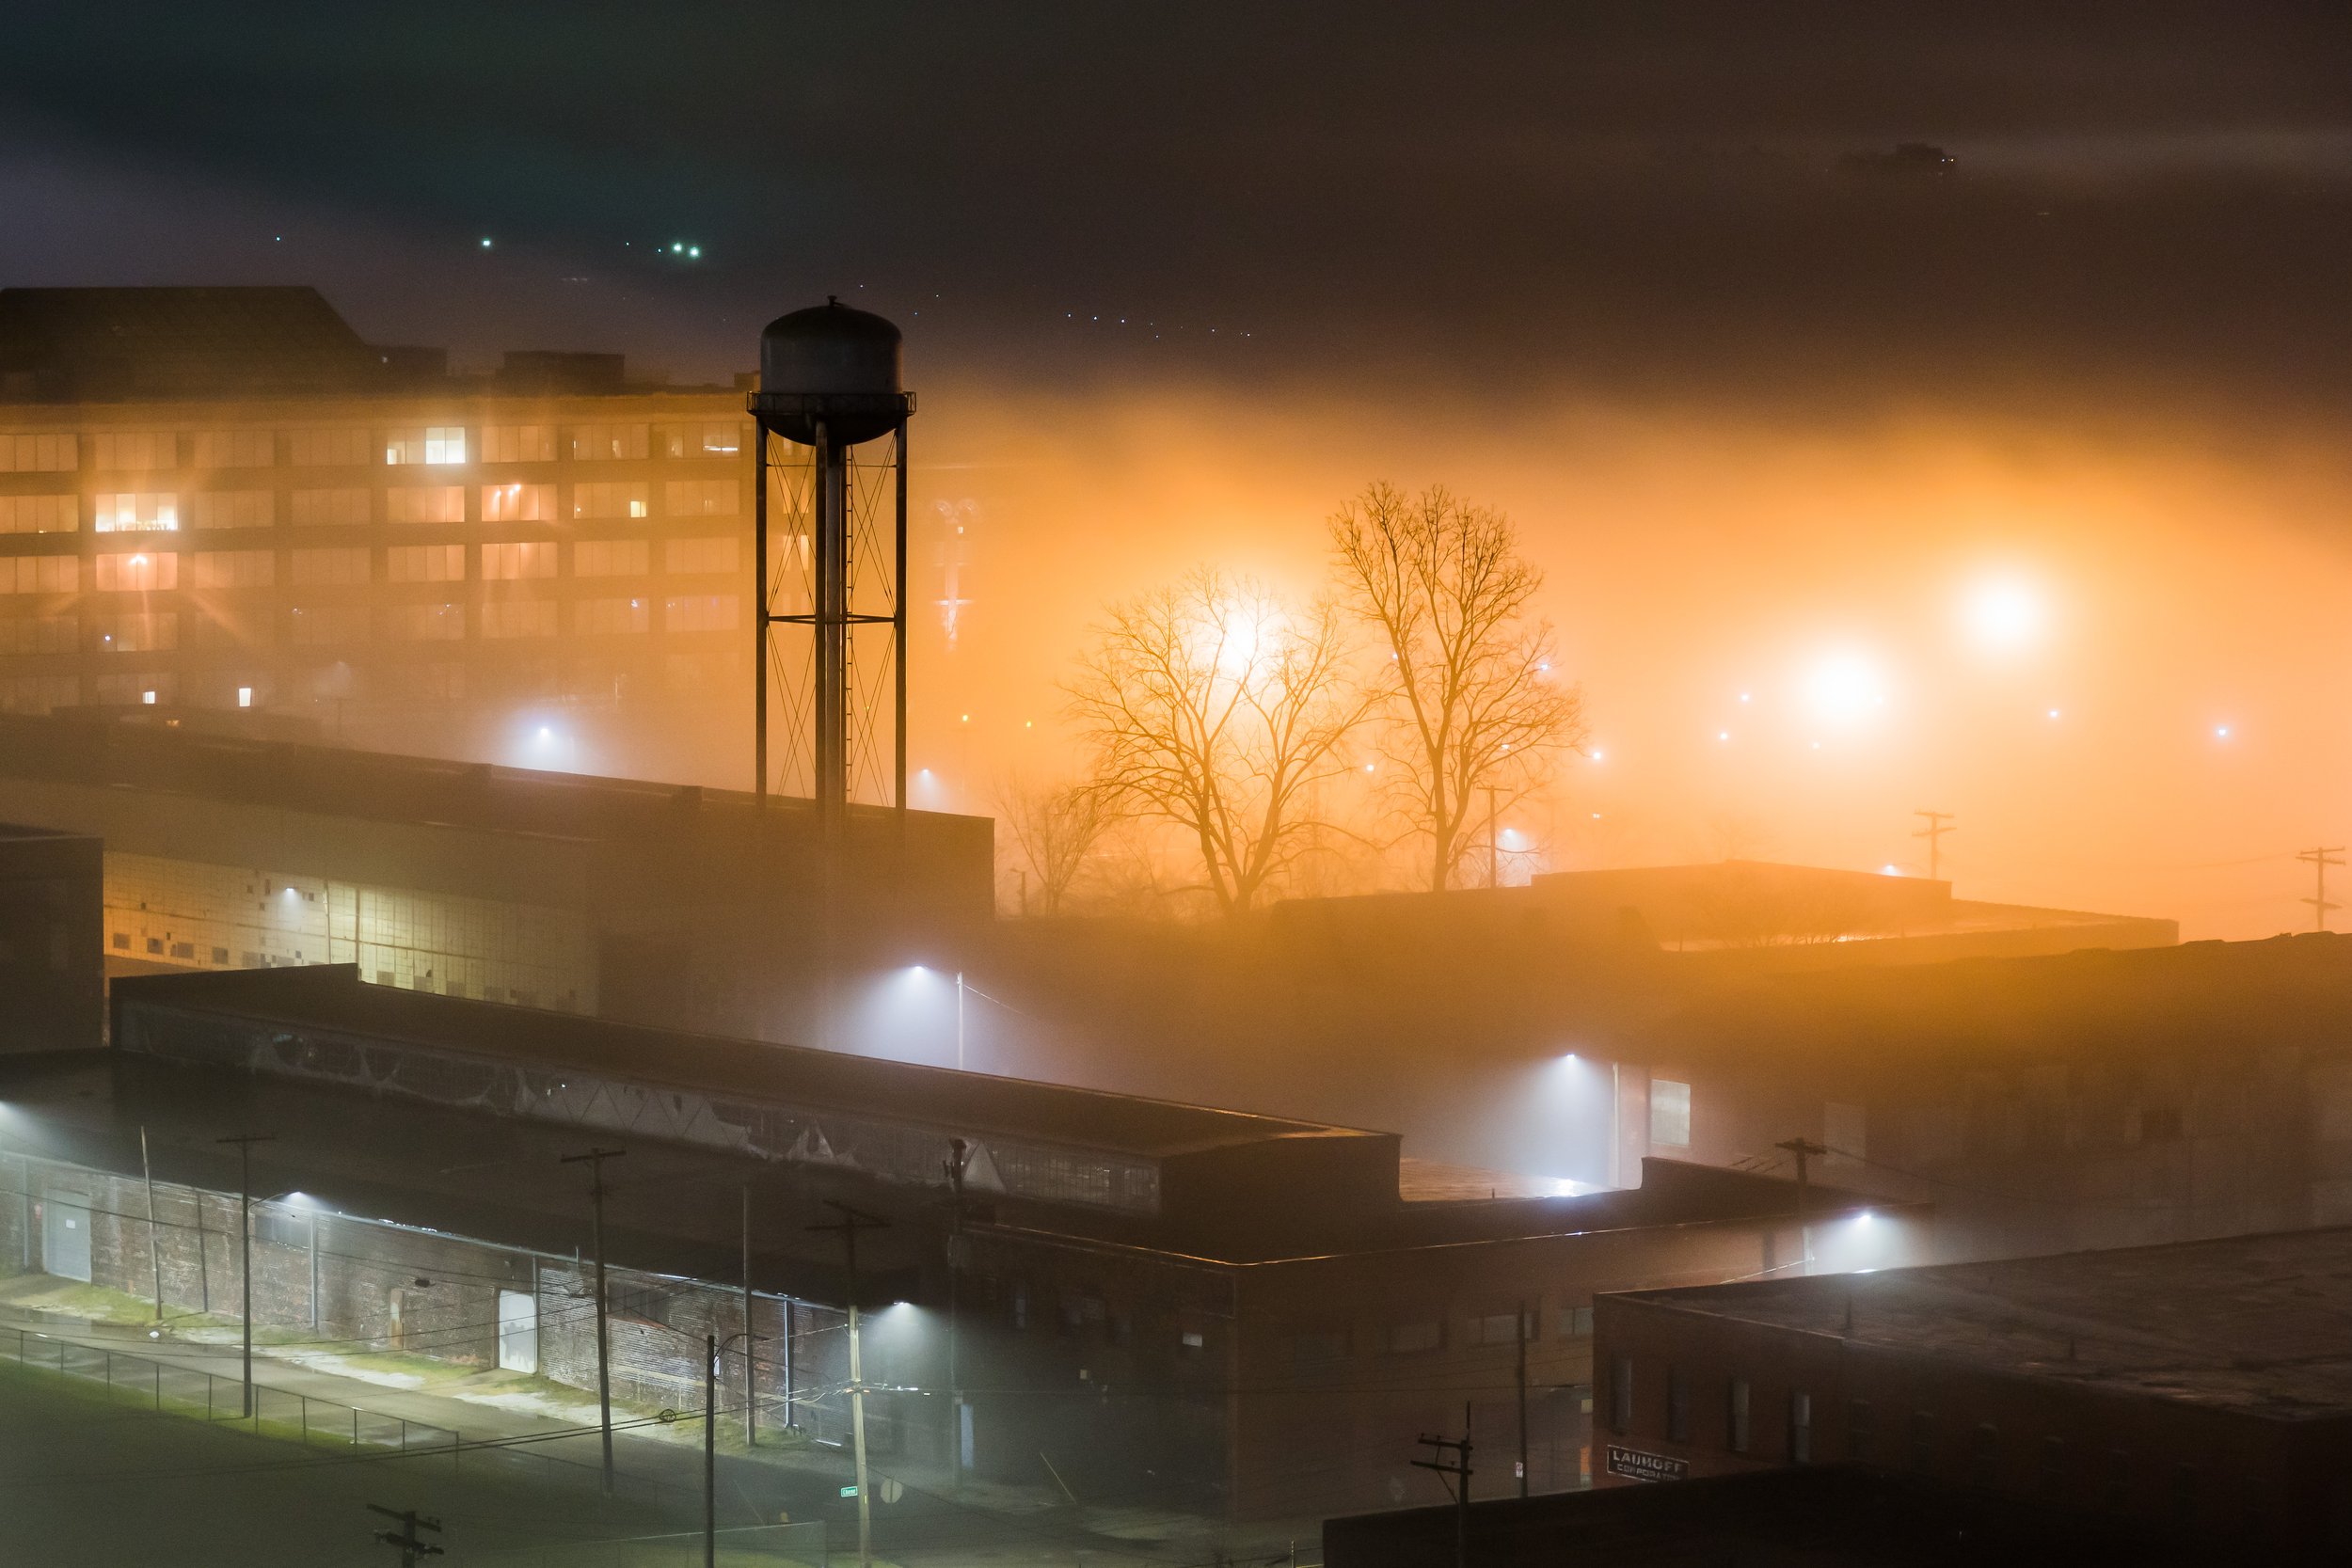 Rivertown | Warehouse District blanketed in fog | 2017